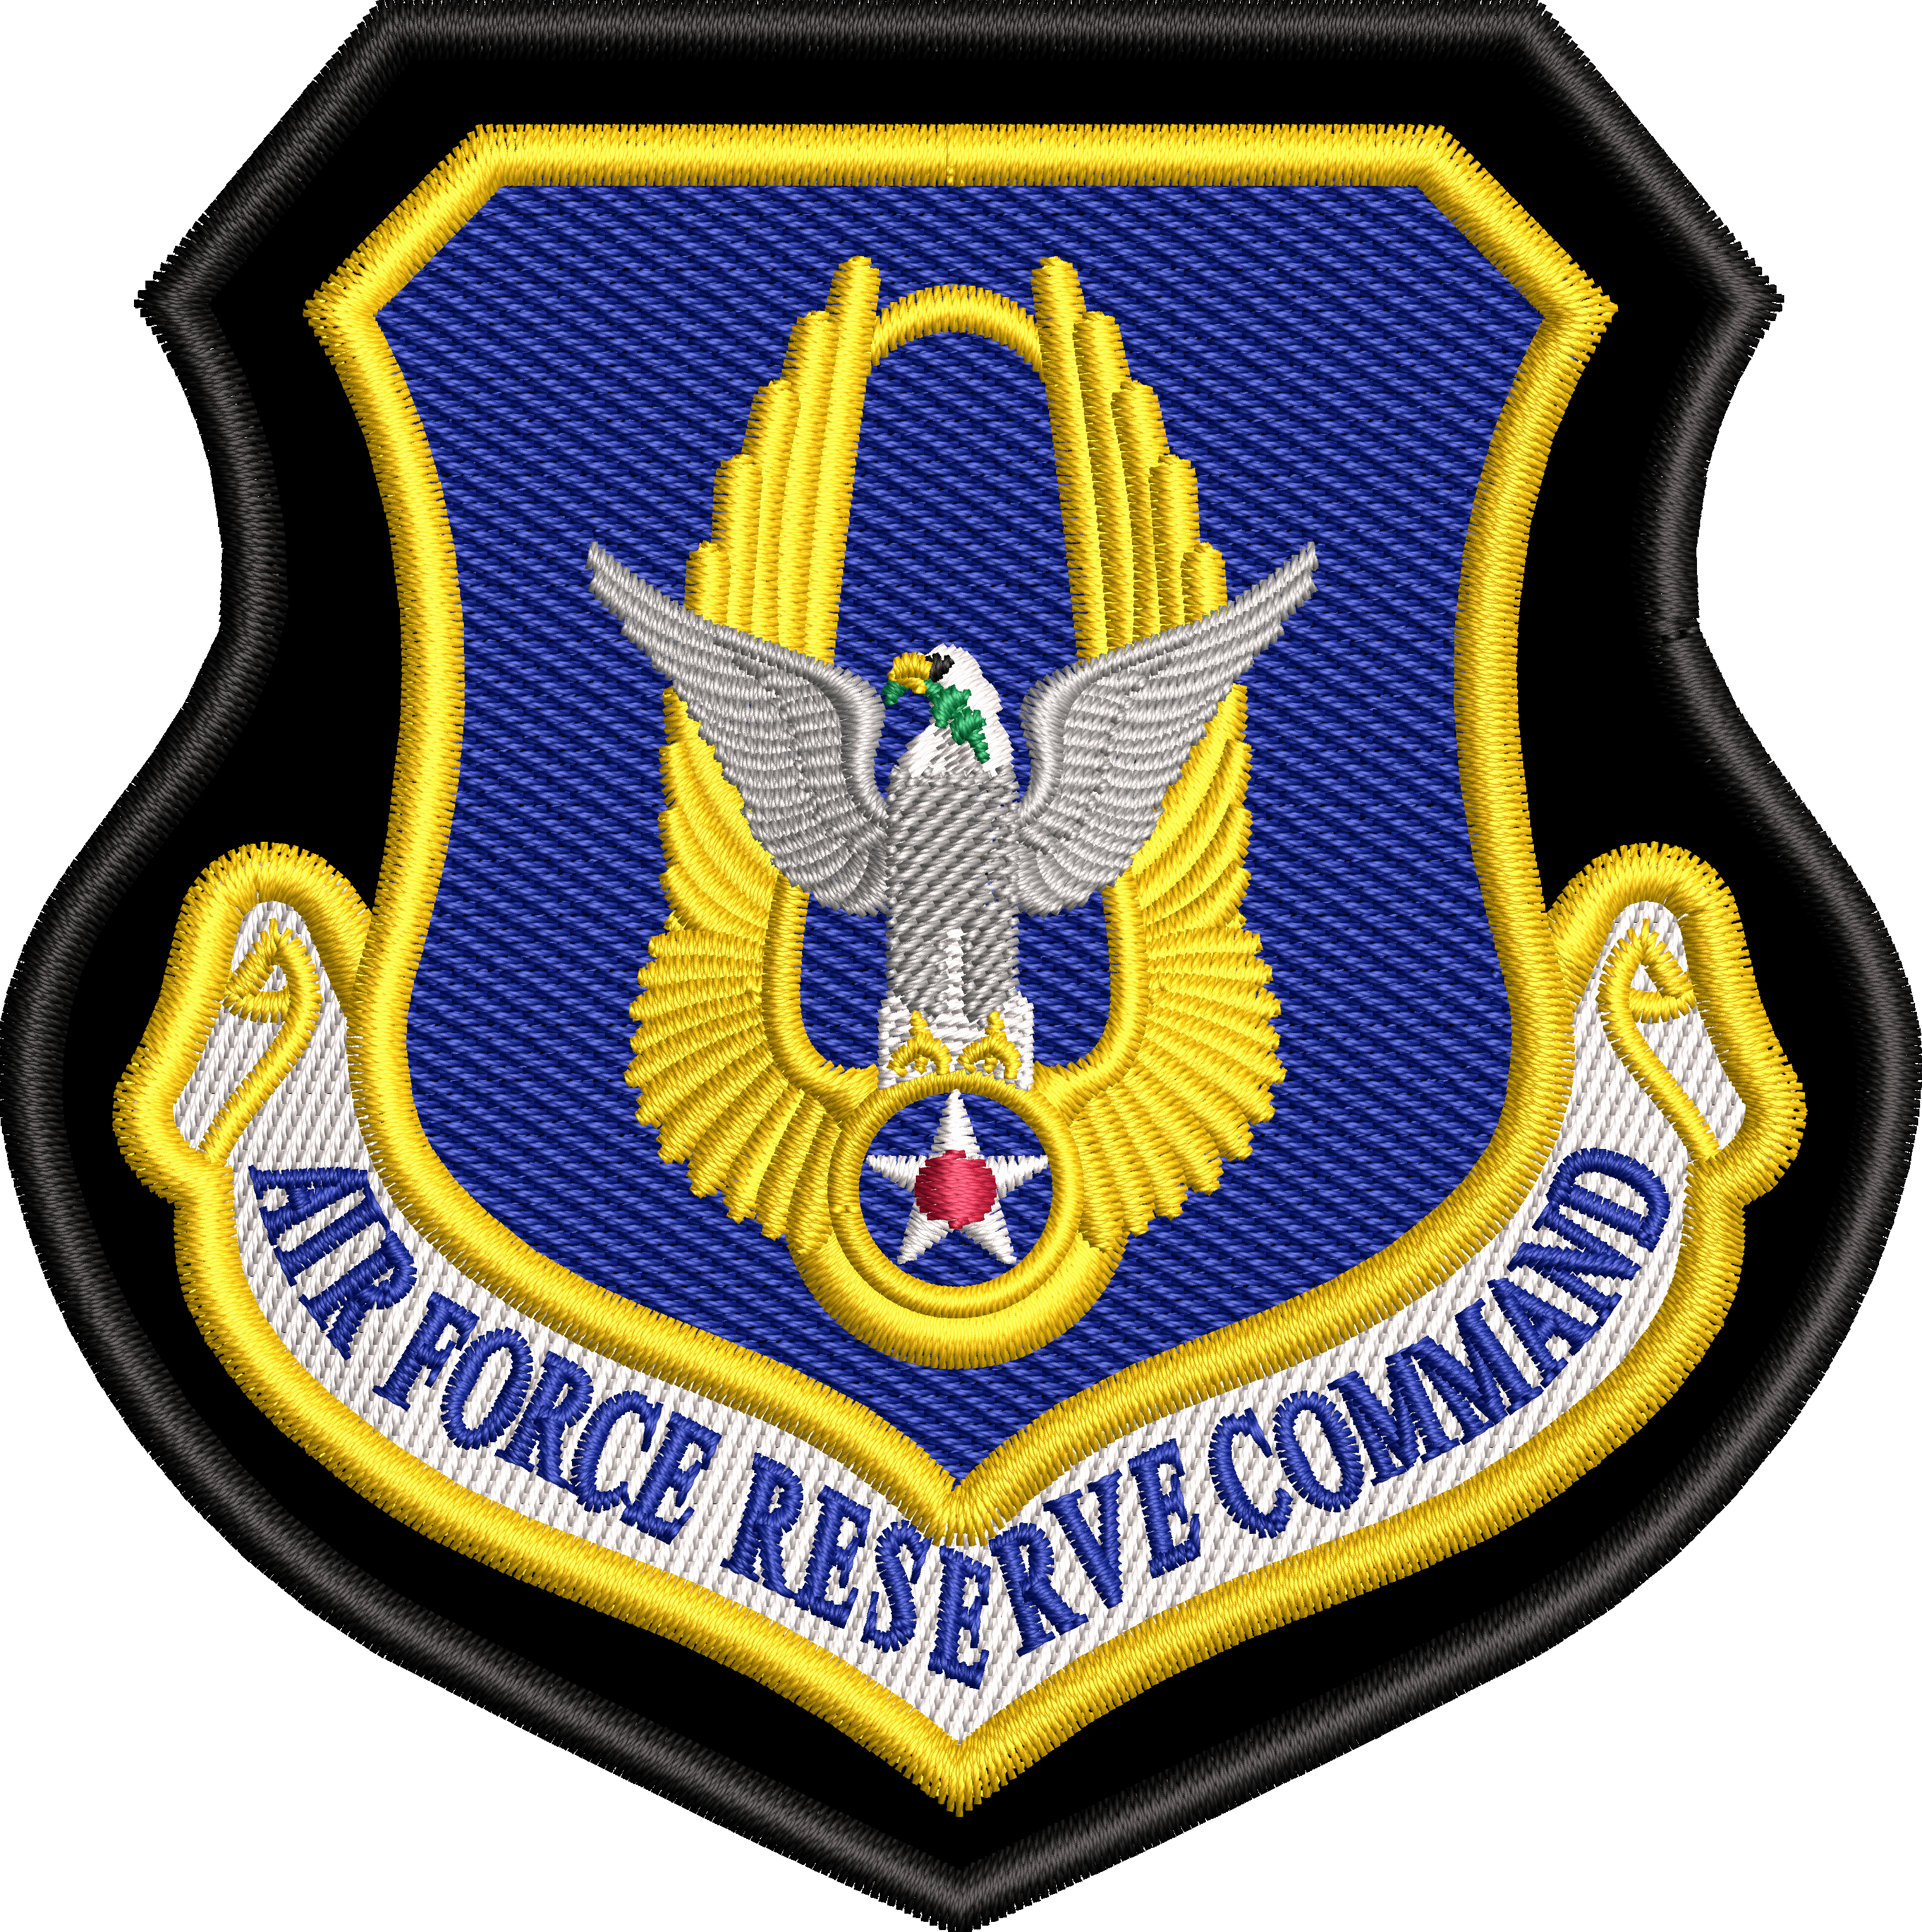 Air Force Reserve Command (AFRC) - A2 Patch (leather jacket)